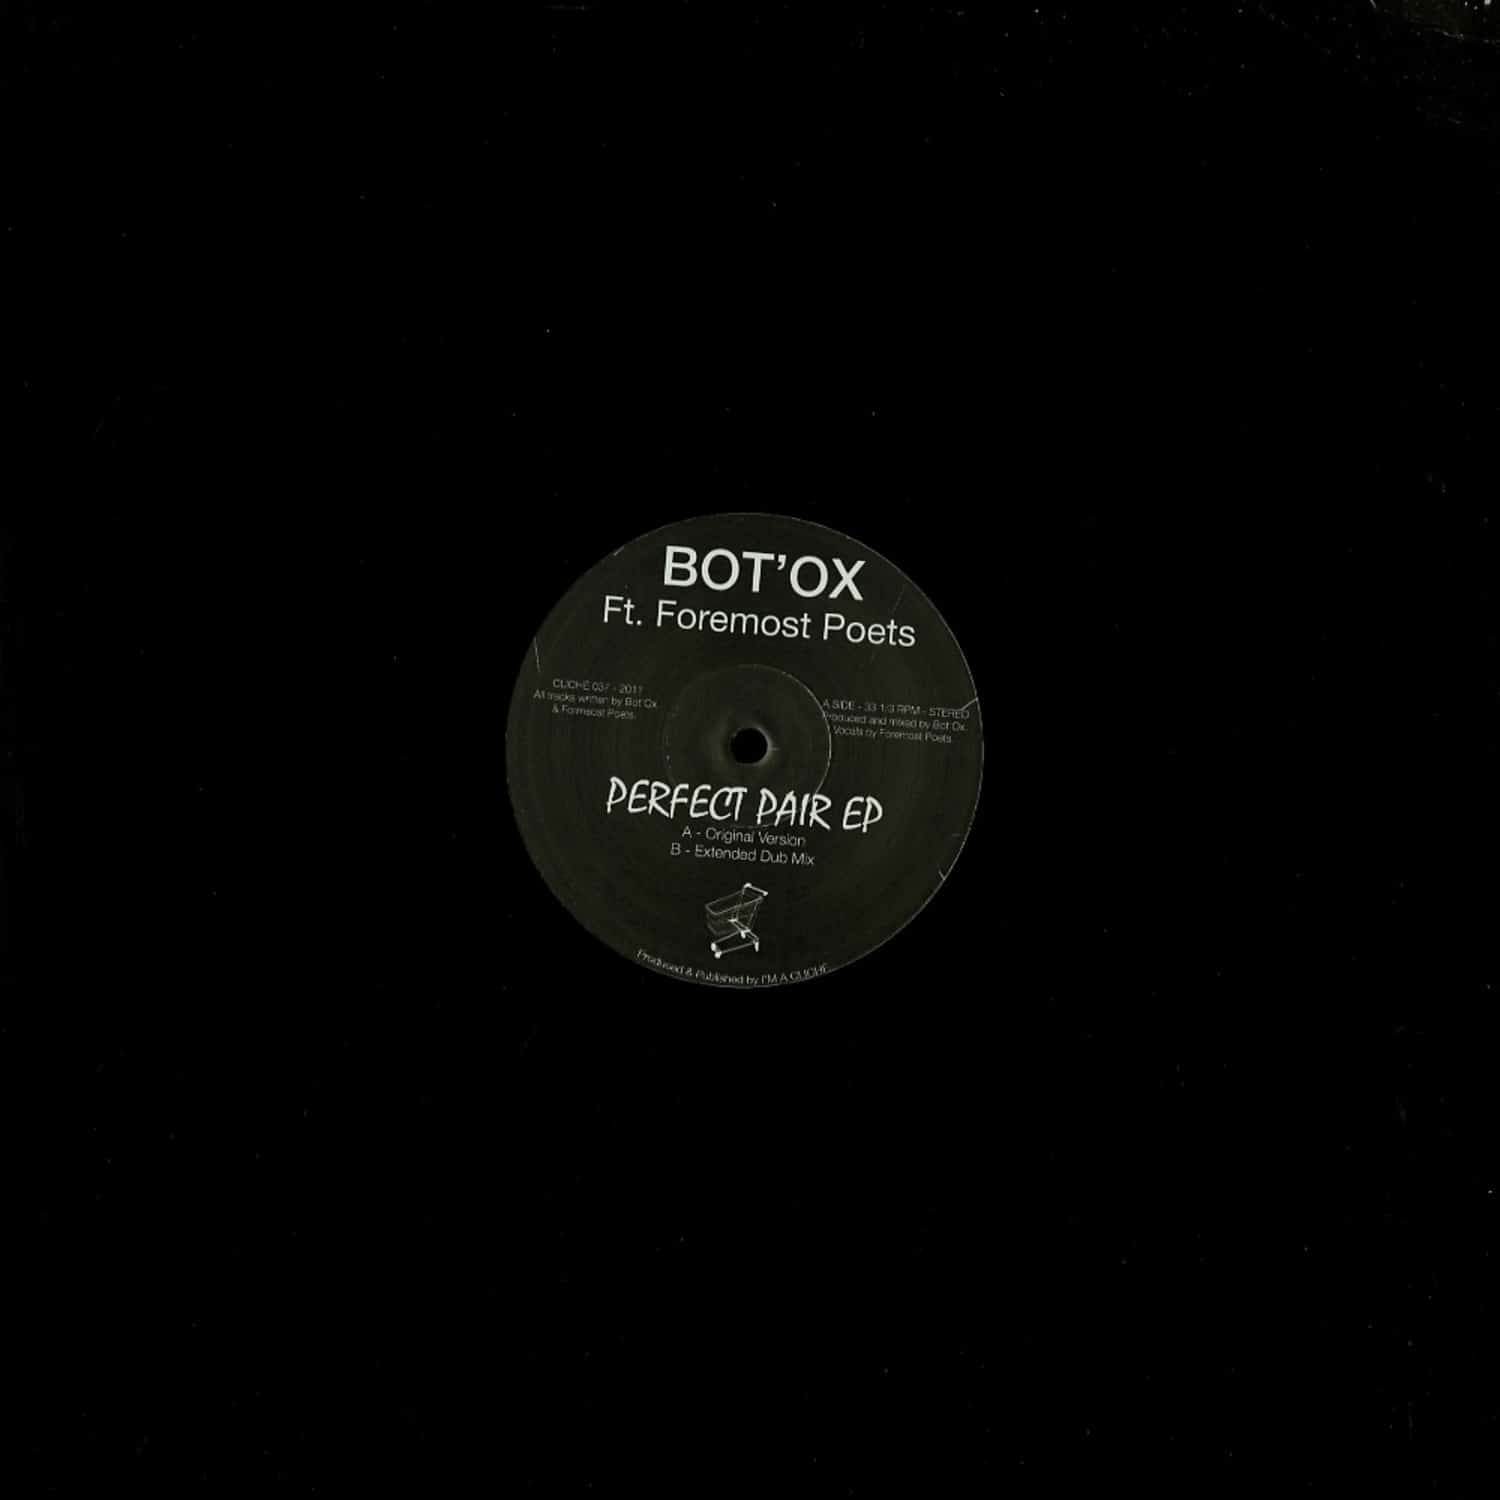 Botox ft Foremost Poets - PERFECT PAIR EP